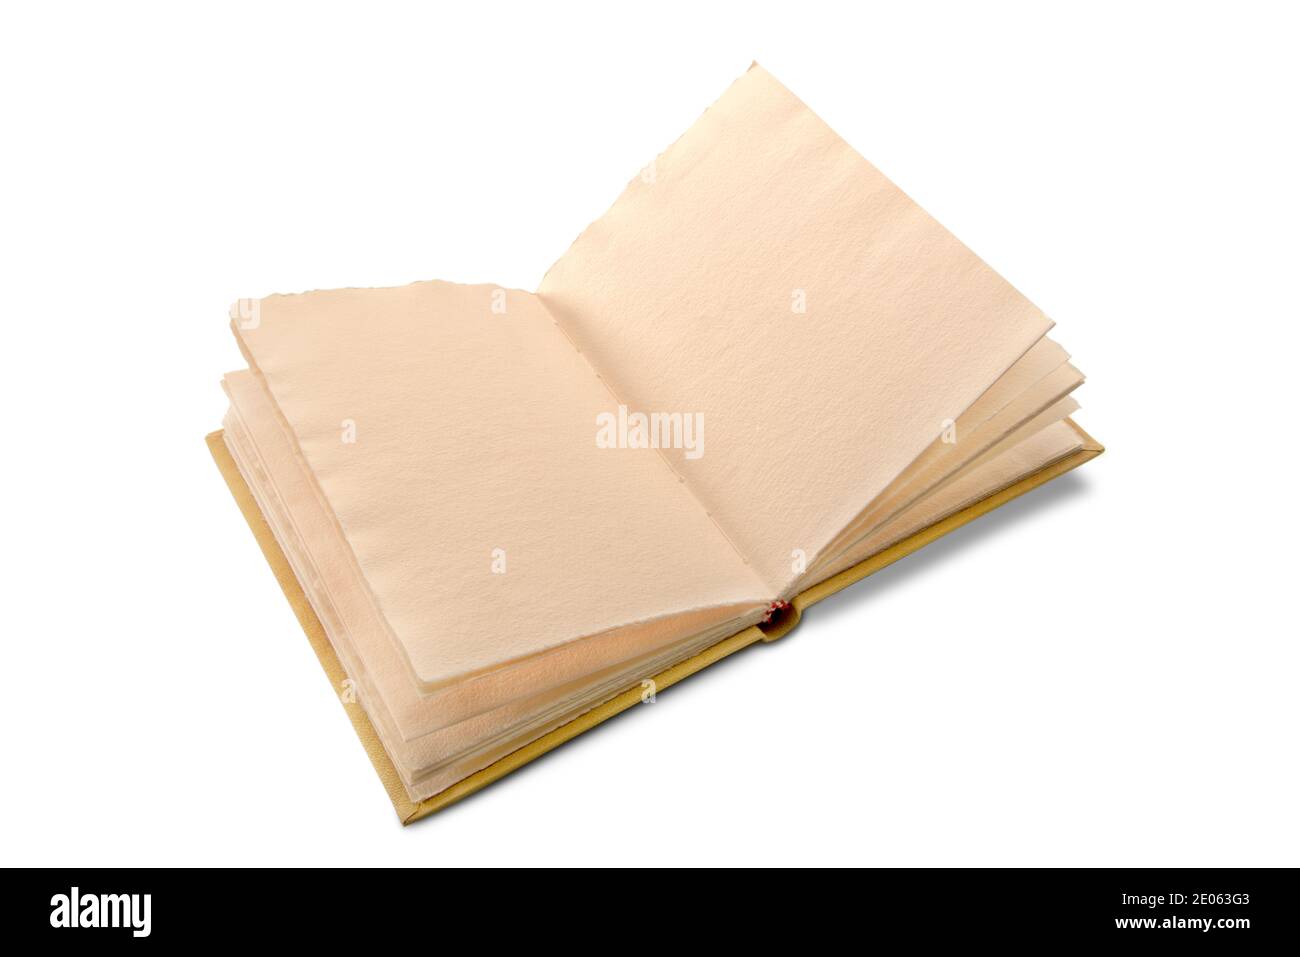 Open antique style book with pages of rough paper with jagged edges, antique leather hardcover notebook isolated on white background Stock Photo